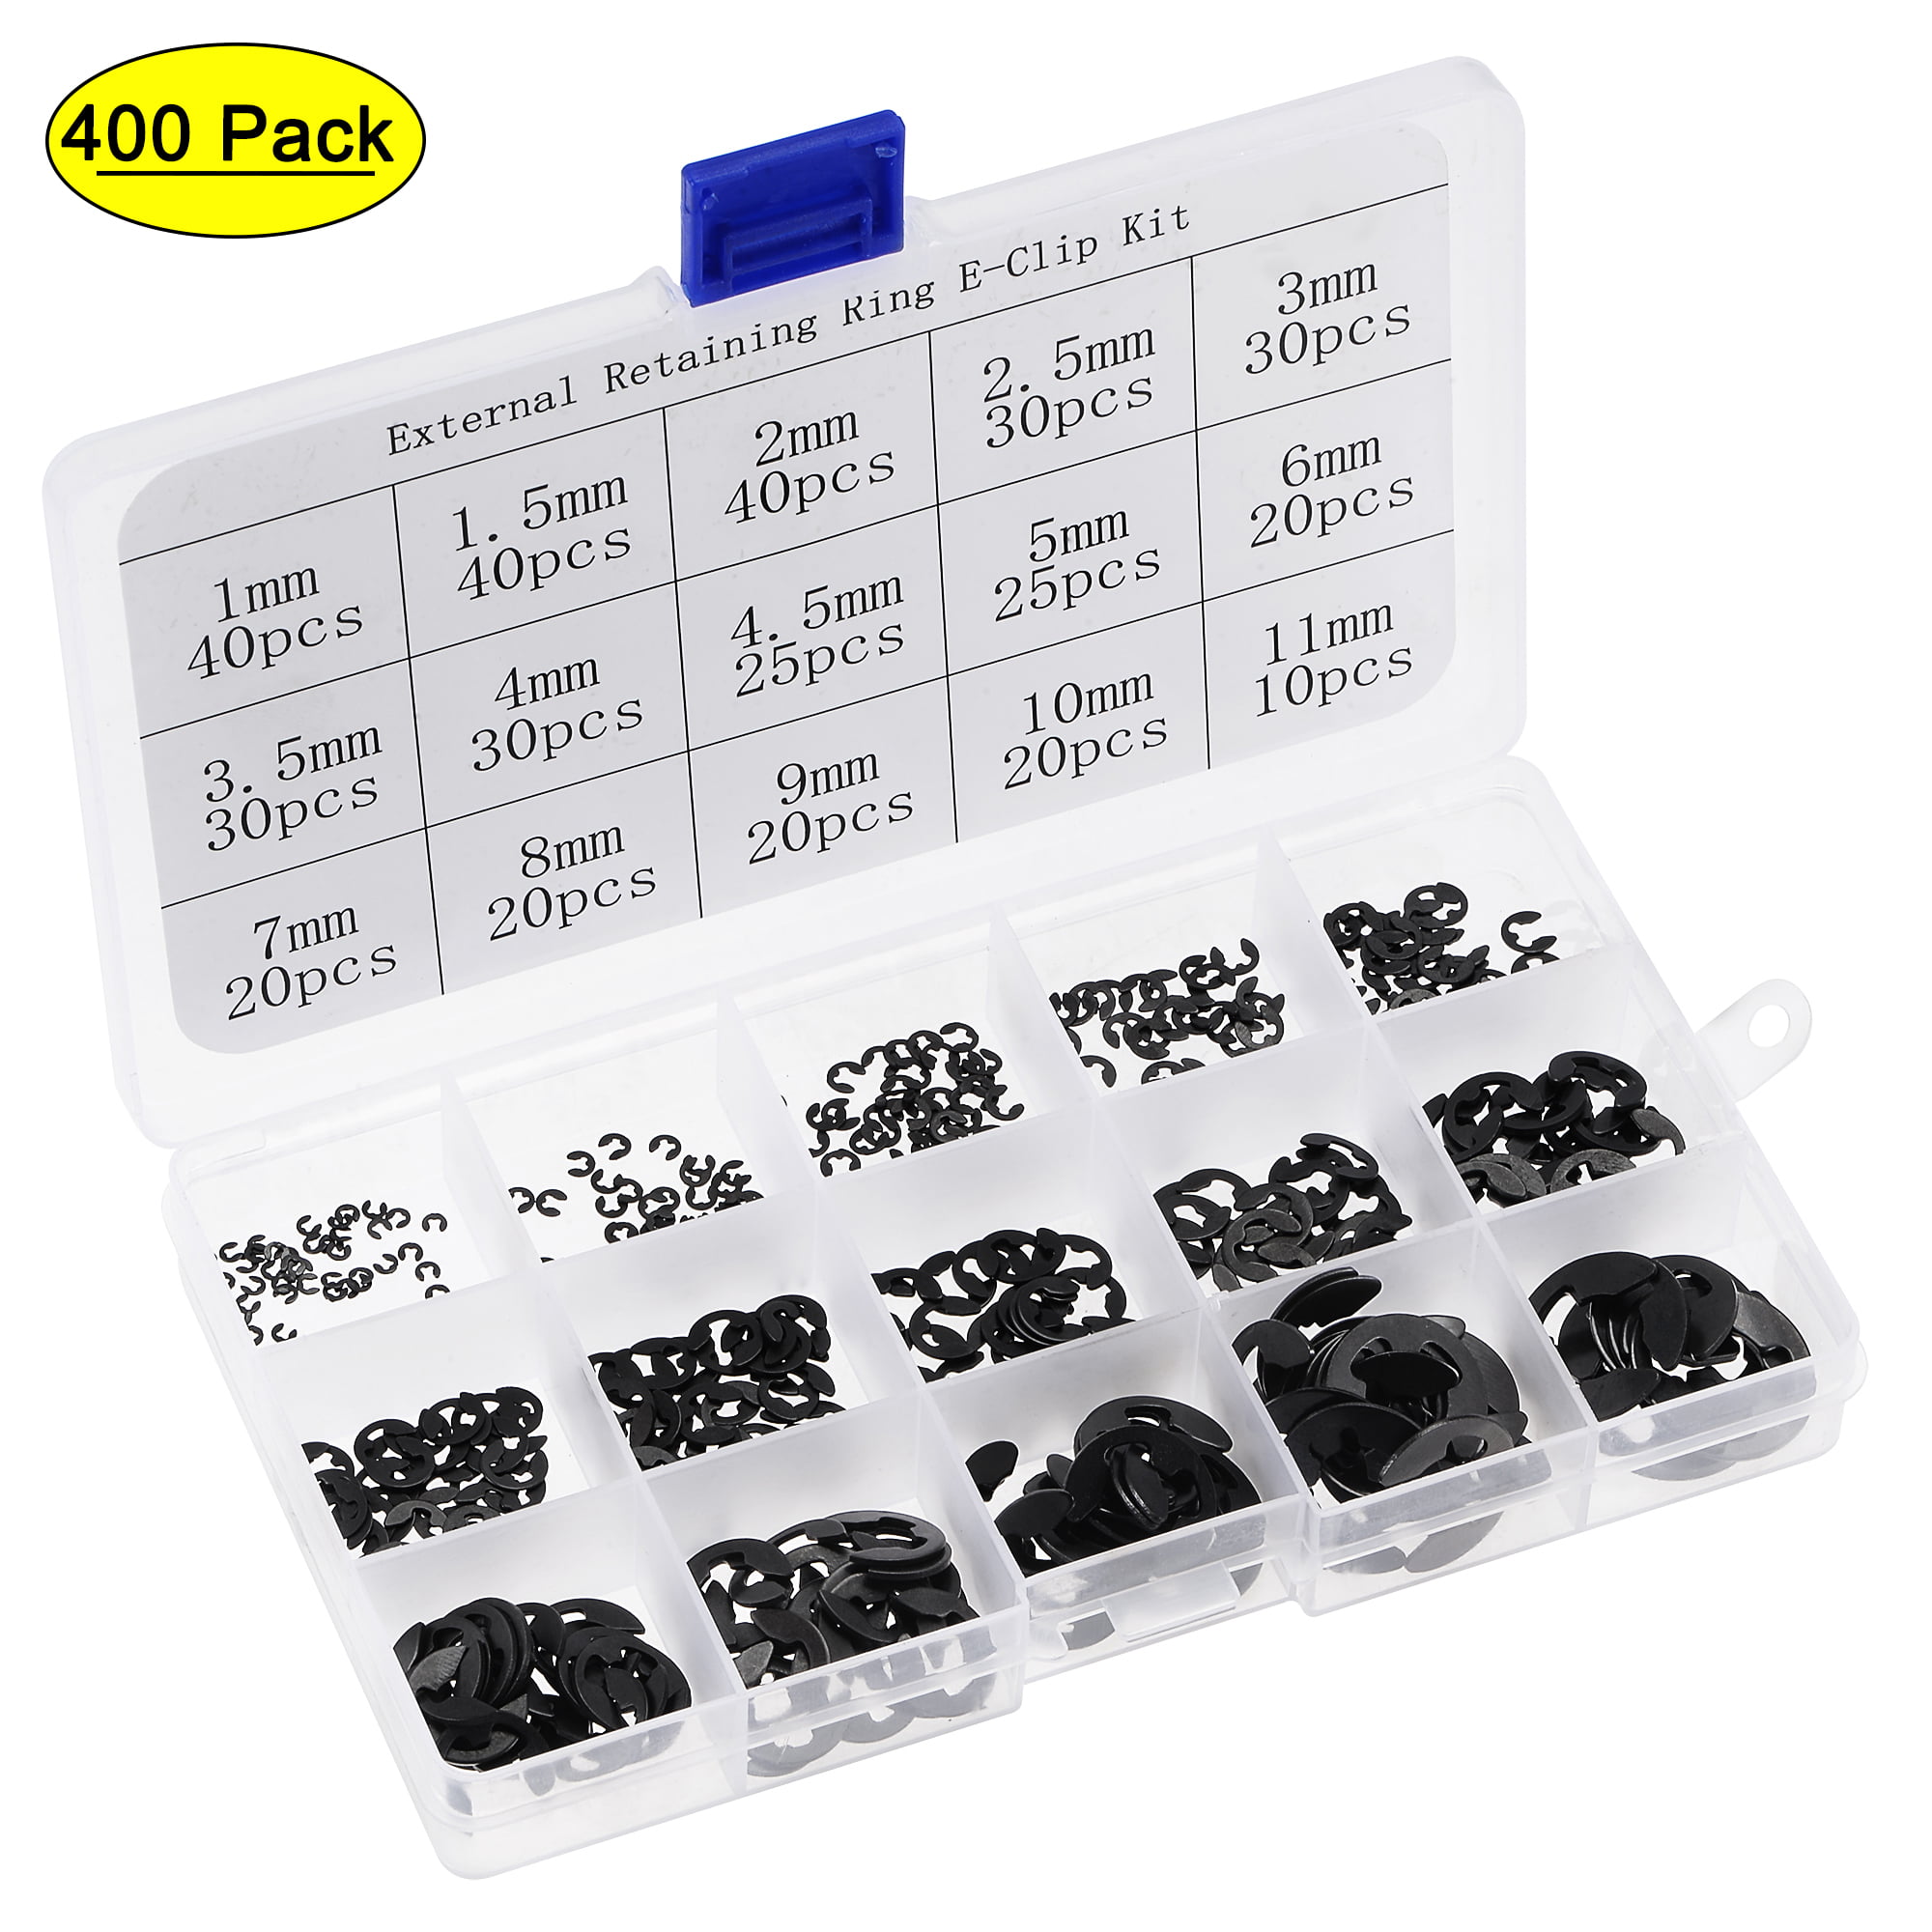 300Pcs 15-Size External Retaining Shaft Snap Ring Washer Carbon Steel Assortment Set 1mm to 11mm uxcell E-Clip Circlip Size 